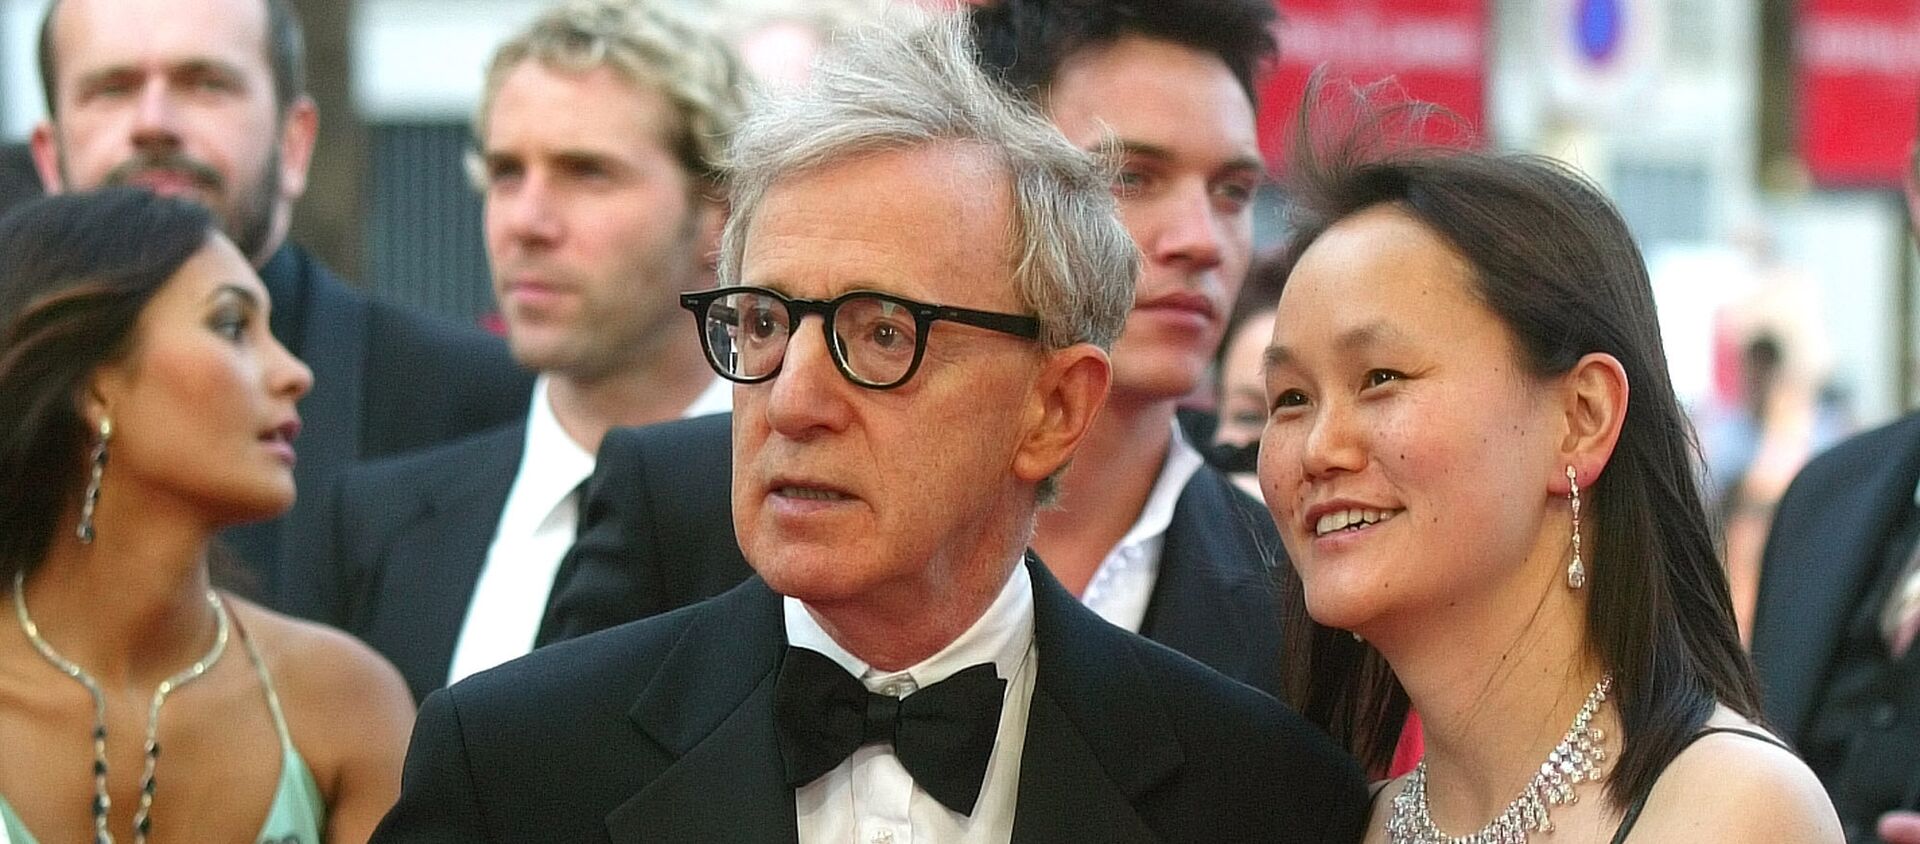 American director Woody Allen and his wife Soon-Yi Previn arrive for the screening of Match Point directed by Woody Allen, at the 58th international Cannes film festival, southern France, Thursday, May 12, 2005 - Sputnik International, 1920, 22.02.2021